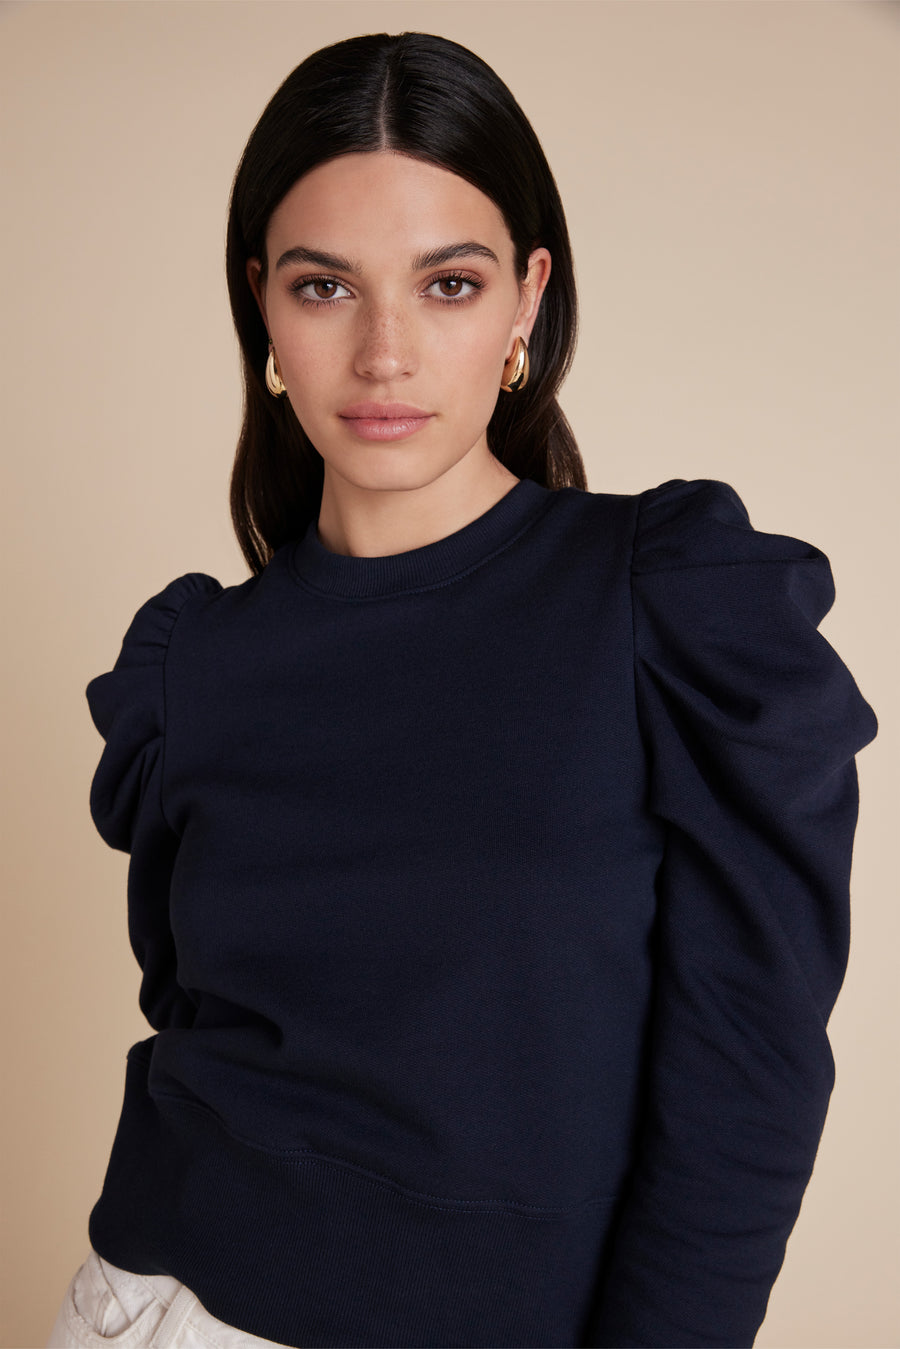 The Just Enough Puff Sweatshirt in Navy